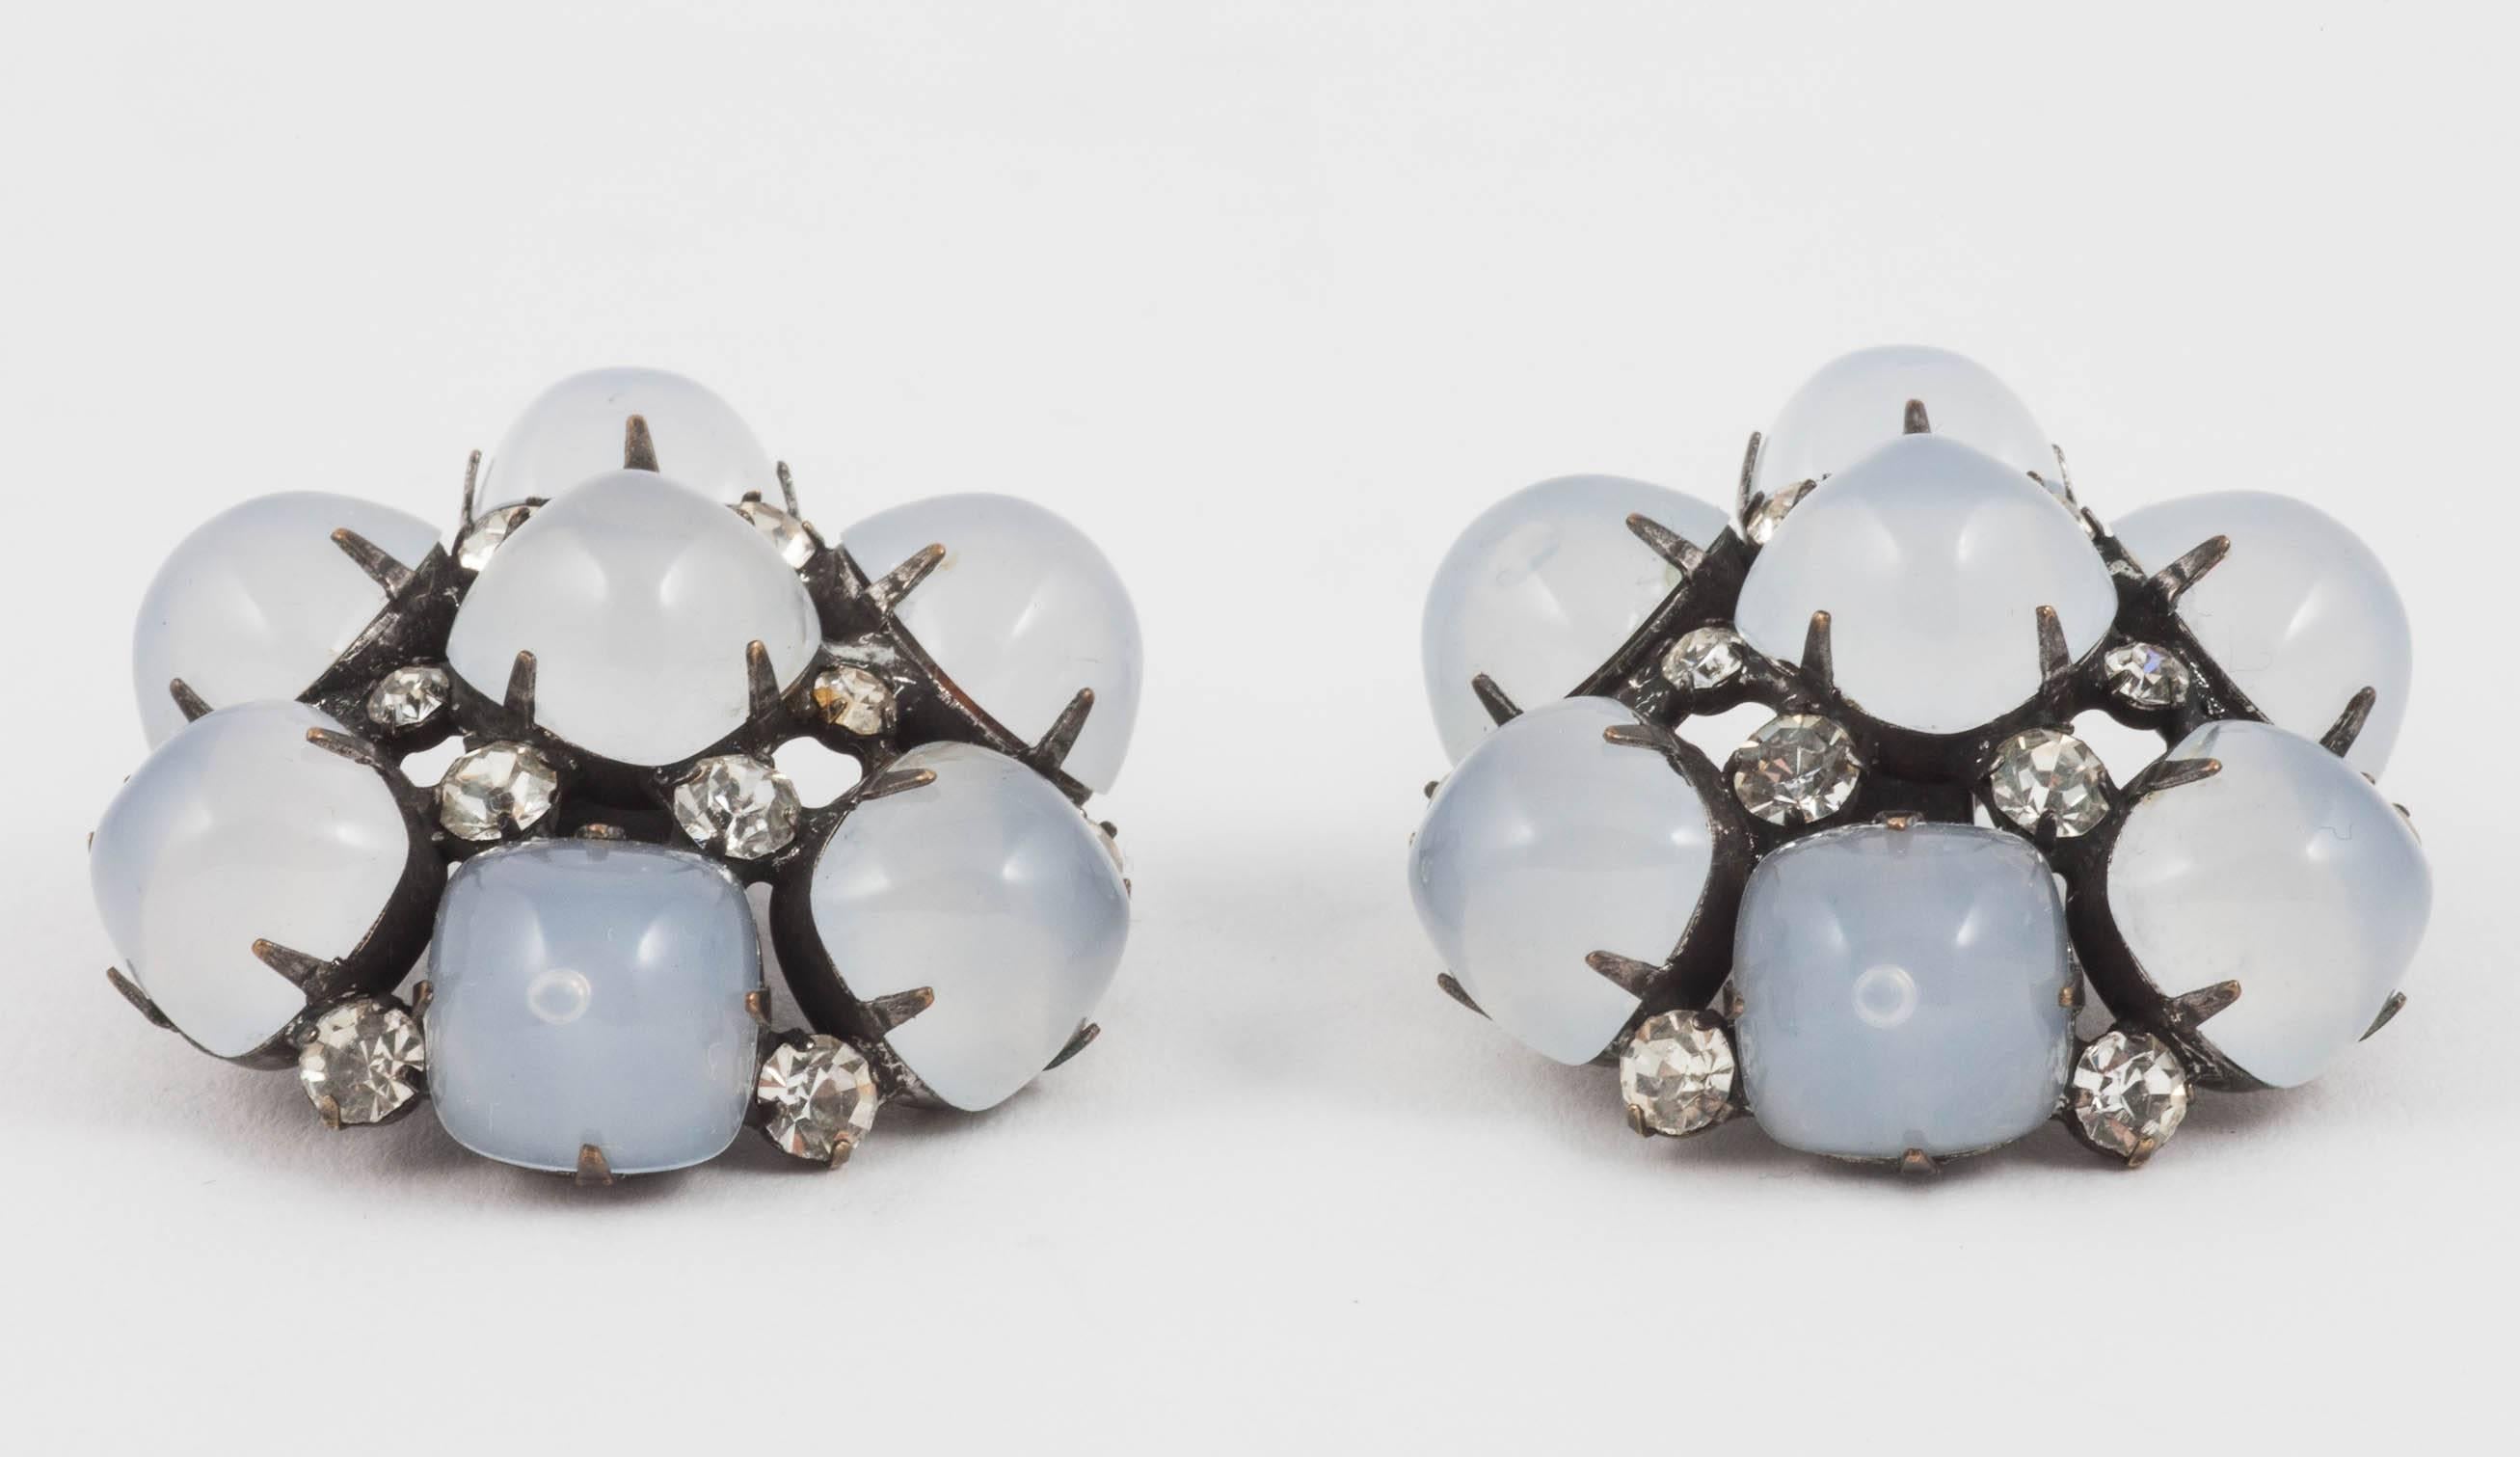 These are from Kenneth Jay Lane's early career when he made pieces for every socialite in New York, Jackie [Kennedy] Onassis and the Duchess of Windsor among them! Large pale grey glass cabochons are hand set onto a gunmetal base and dotted with